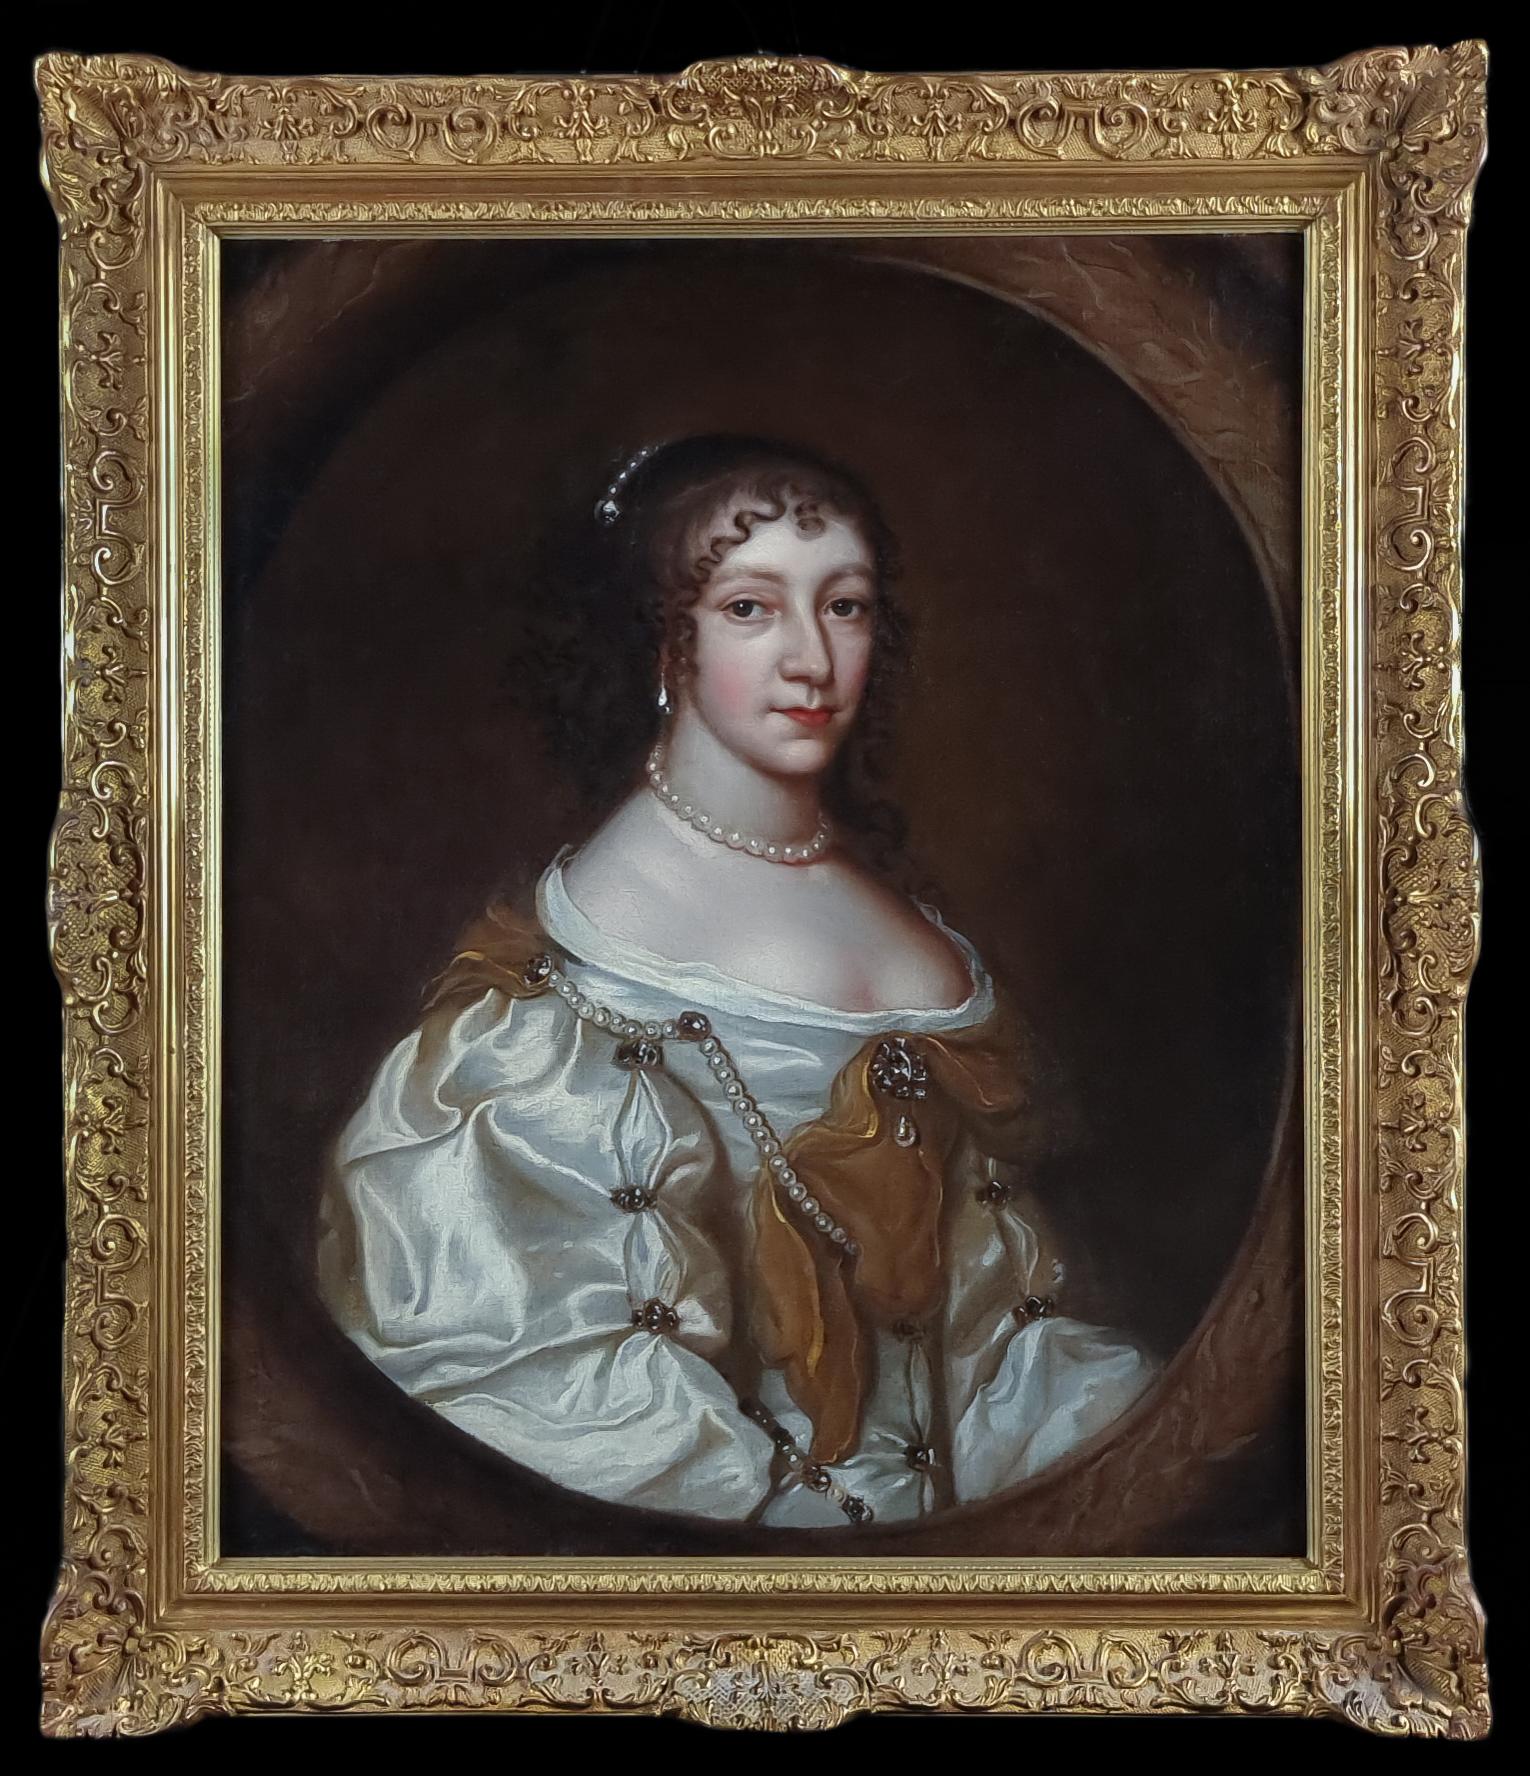 (Circle of) Sir Peter Lely Portrait Painting - Portrait of a Lady in Silver Silk Dress & Pearls c.1660, Oil on canvas painting